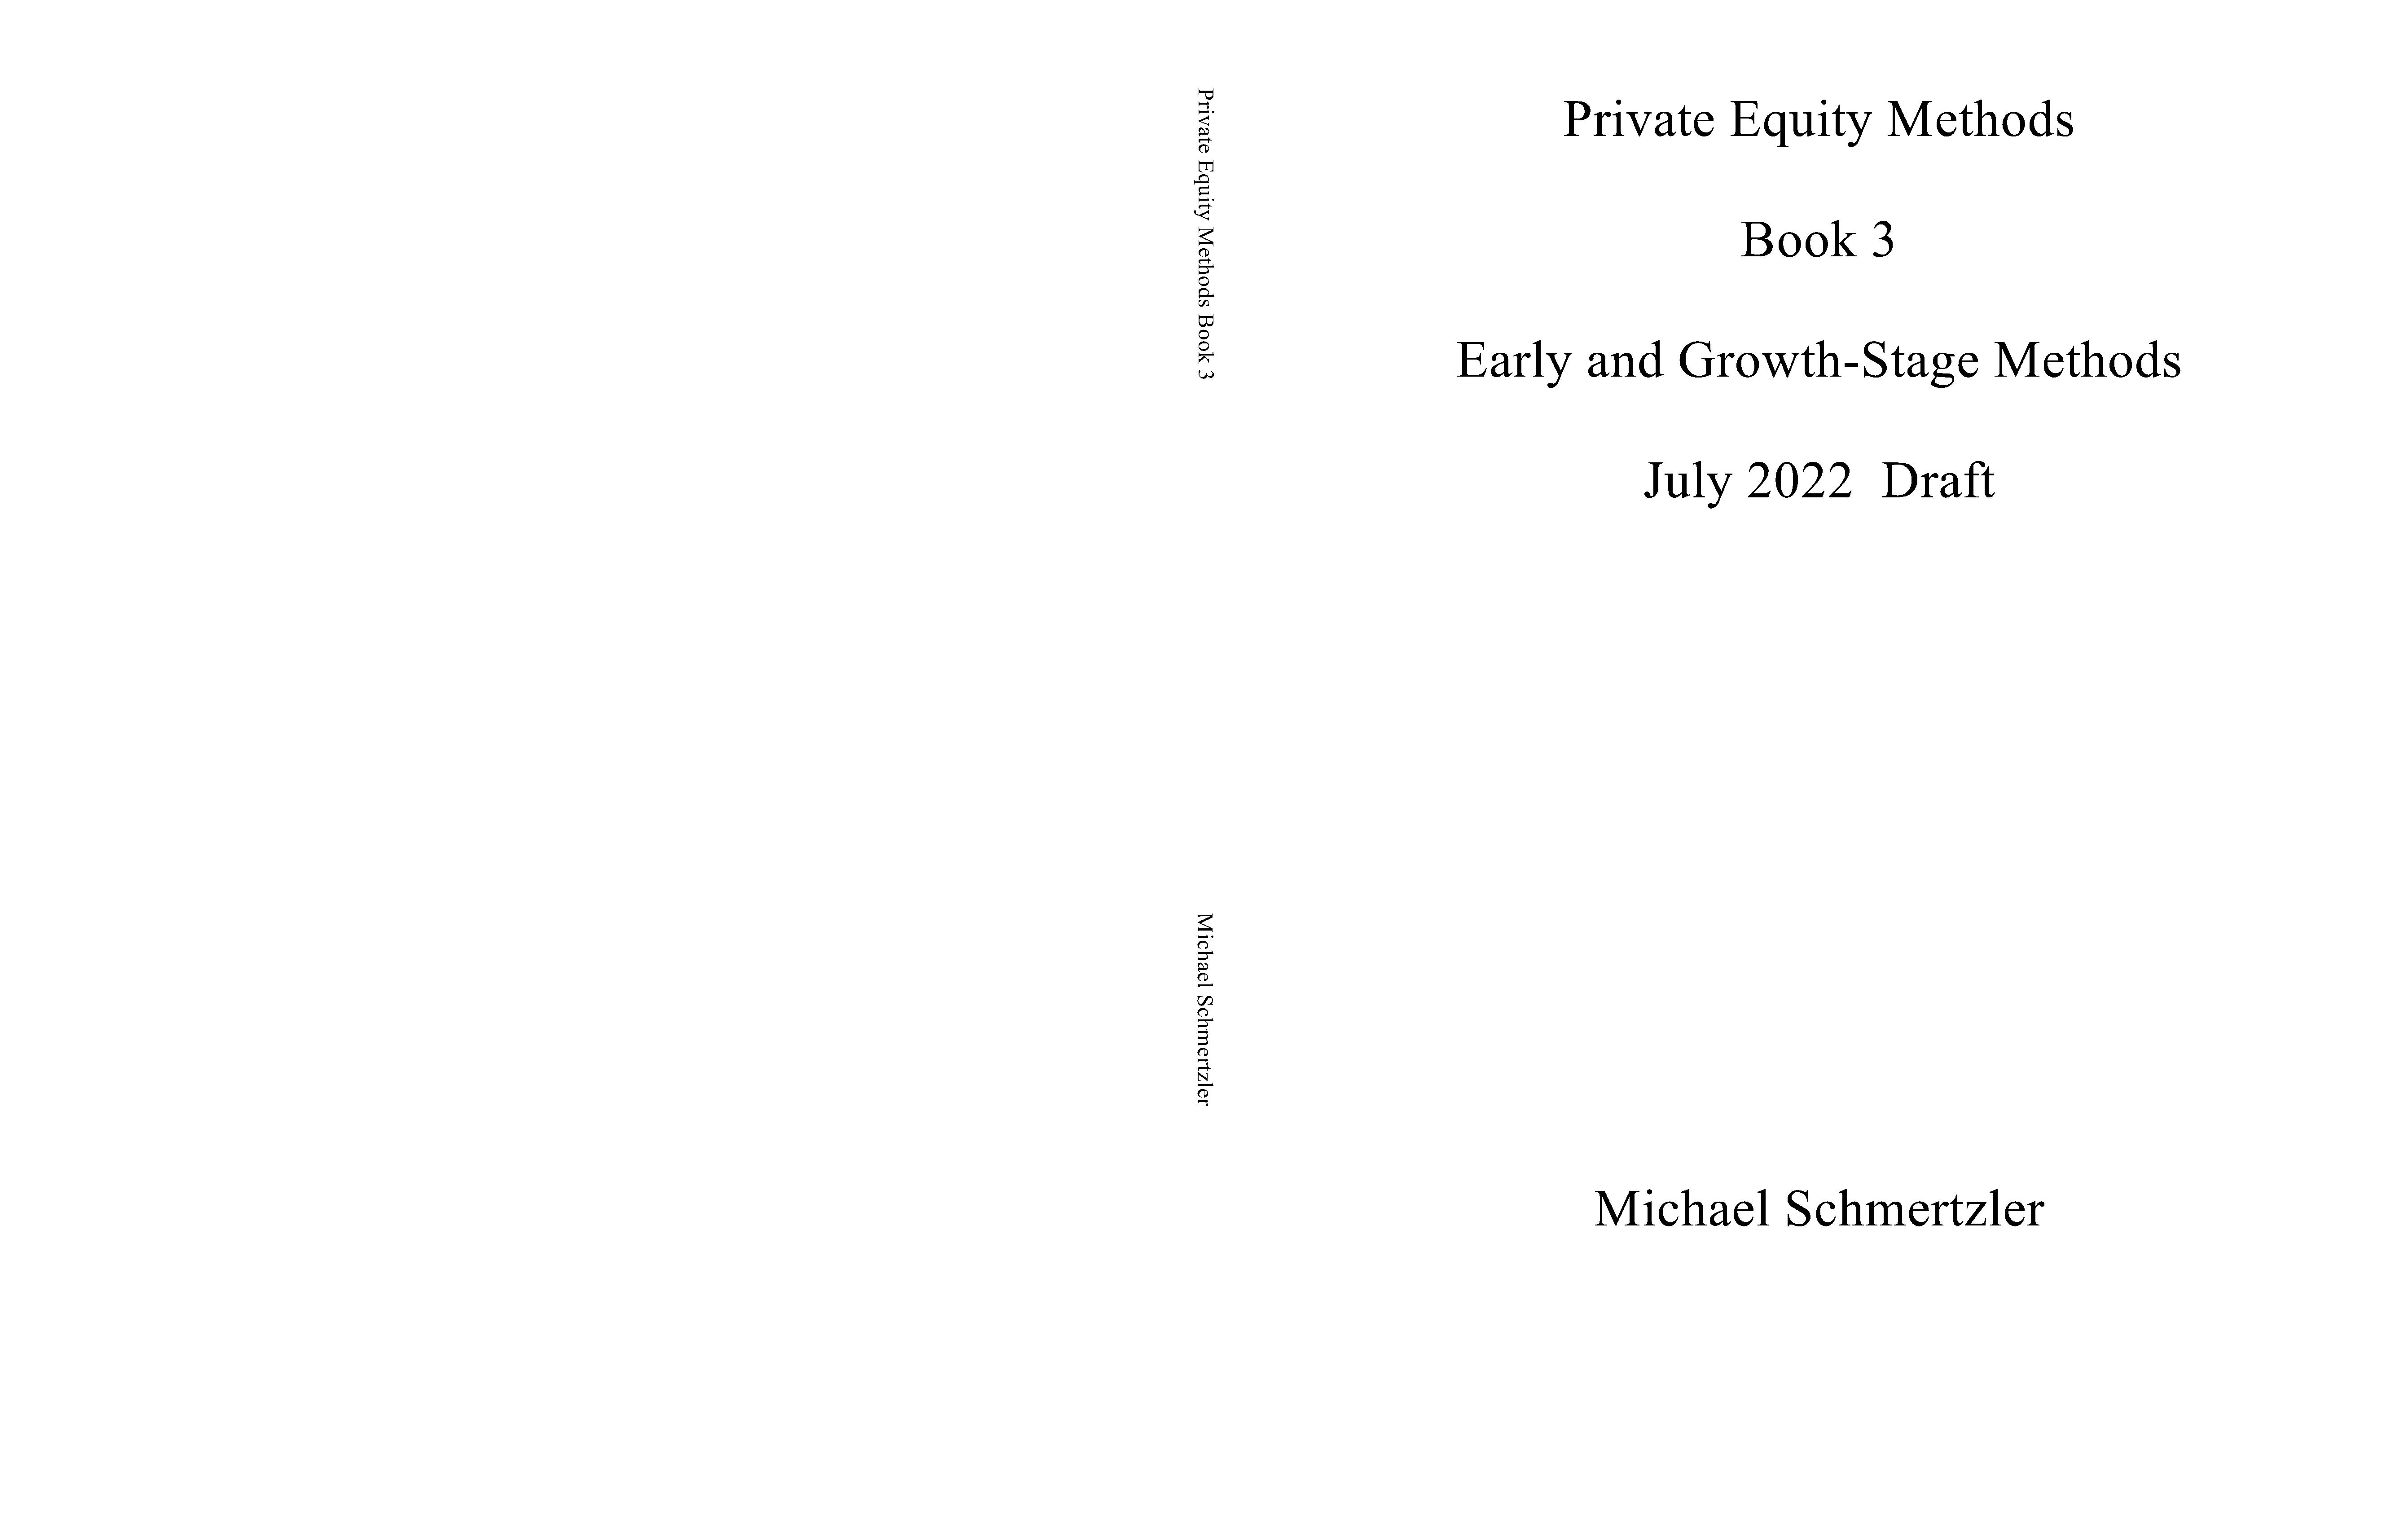 Private Equity Methods Book 3 cover image